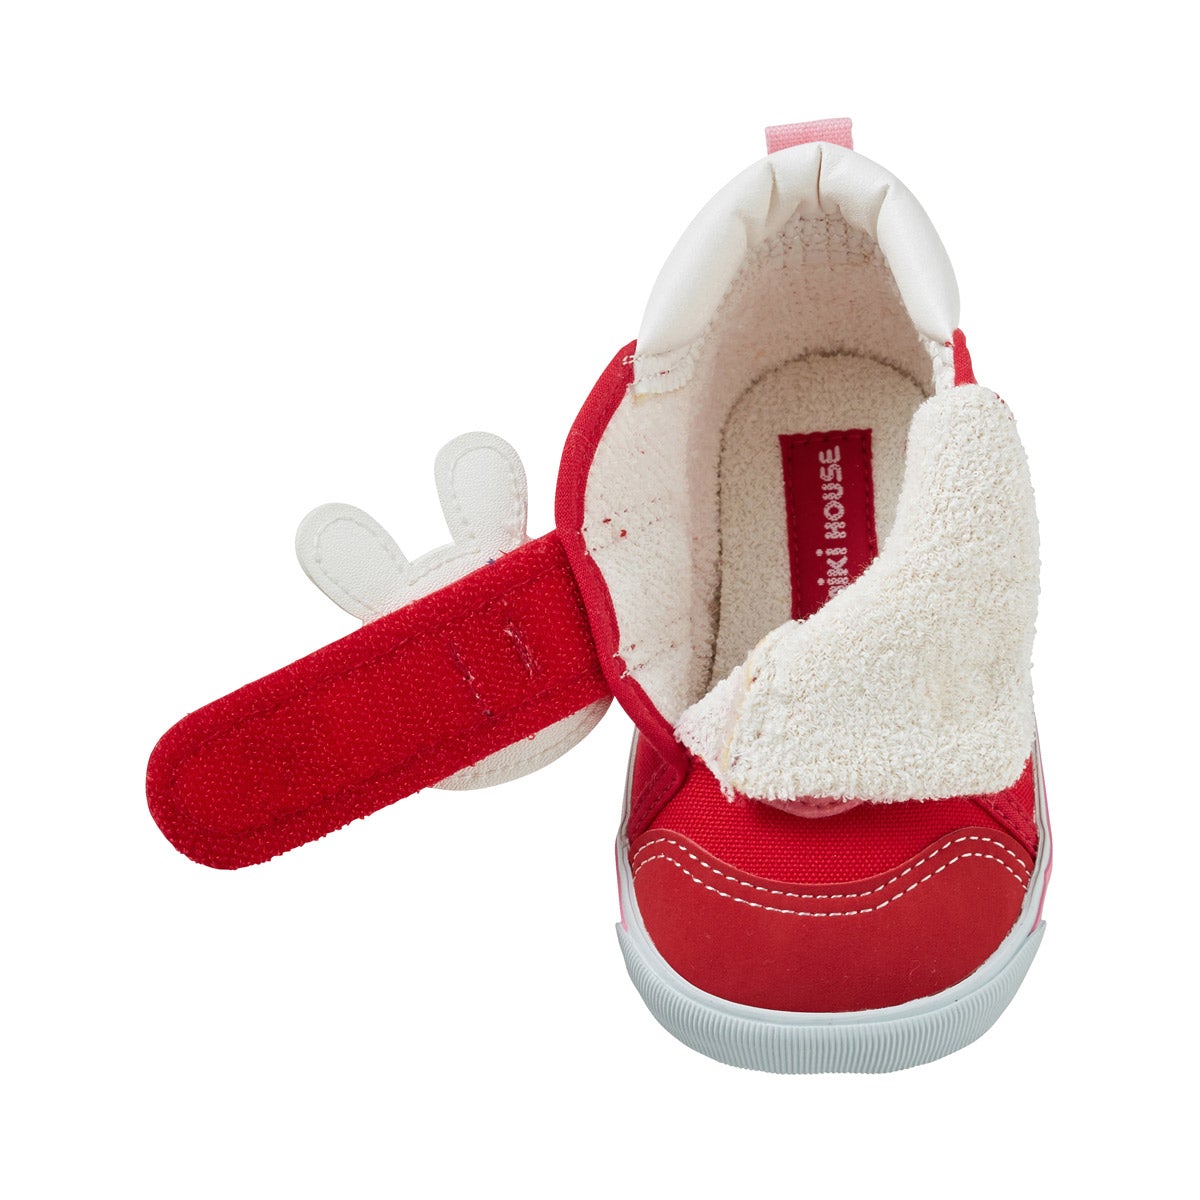 Miki House Kids Happy Usako Second Shoes in Red